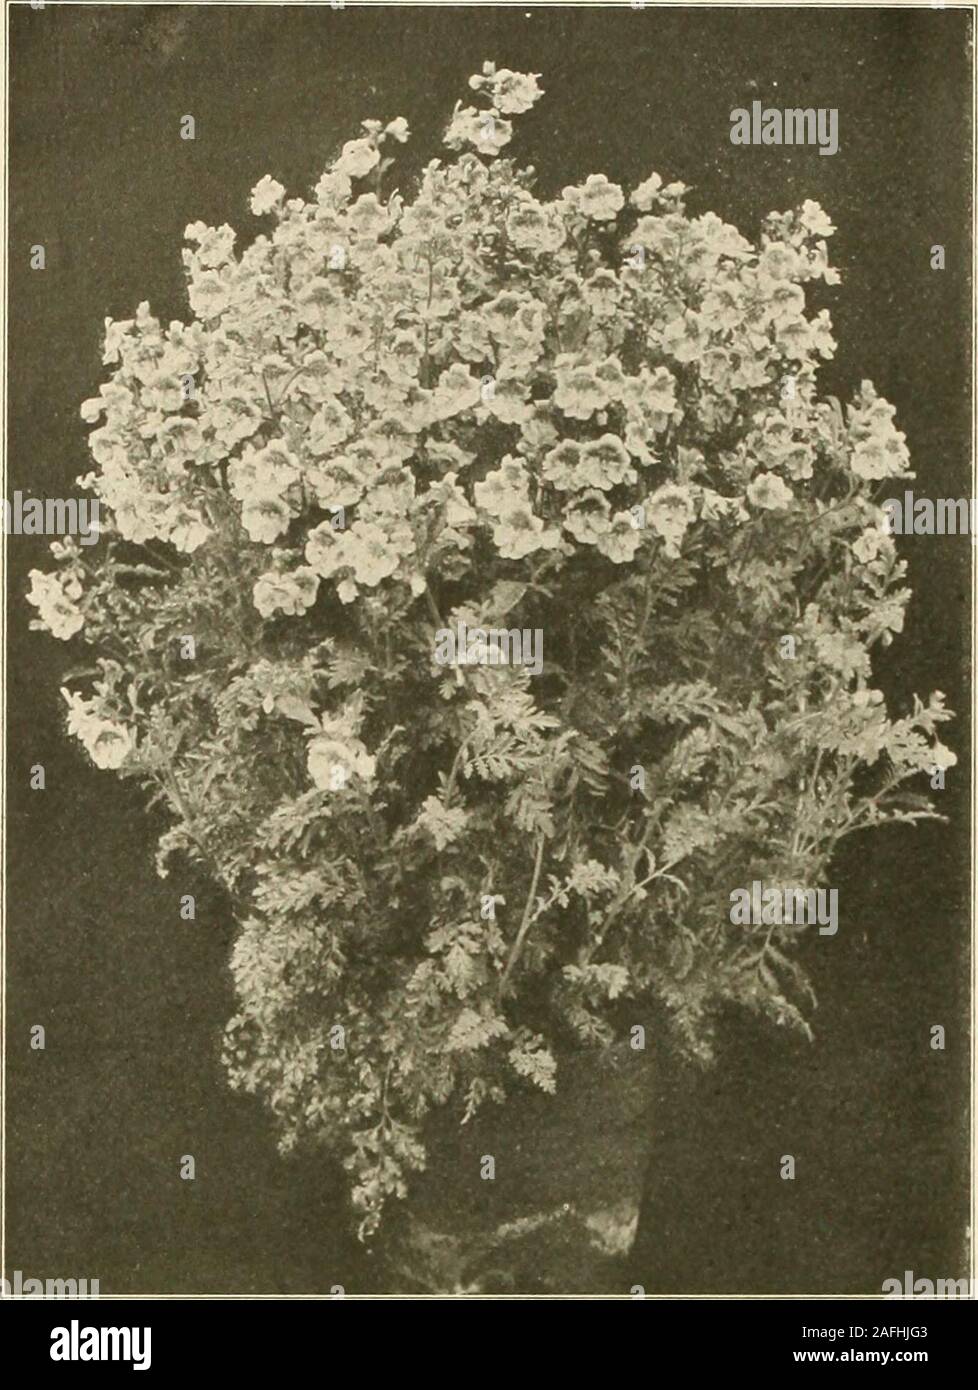 . Farquhar's autumn catalogue : 1913. Mignonette farquhars Universal. 70 R. & J. FARQUHAR & CO., BOSTON. FLOWER SEEDS FOR THE GREENHOUSE.—Co/;^//7:/e(/.. LUPINUS. {Lupin.) 2525 Hartwegii. White. Splendid for bouquets. Oz., 25c.; pkt., 5c.25;,() Hartwegii. Azure Blue. A delicate shade esteemed for cut flowers. Oz., 30c.; pkt., 5c.2535 Farquhars Pink. Handsome spikes of salmon-pink flowers, particularly useful for cutting, lasting a week or longer in water. This color is ideal for forcing in the greenhouse. Oz., 50c.; pkt., loc. SCHIZANTHUS. {Butterfly Flower.) 3945 Farquhars Large=flowered Hybr Stock Photo